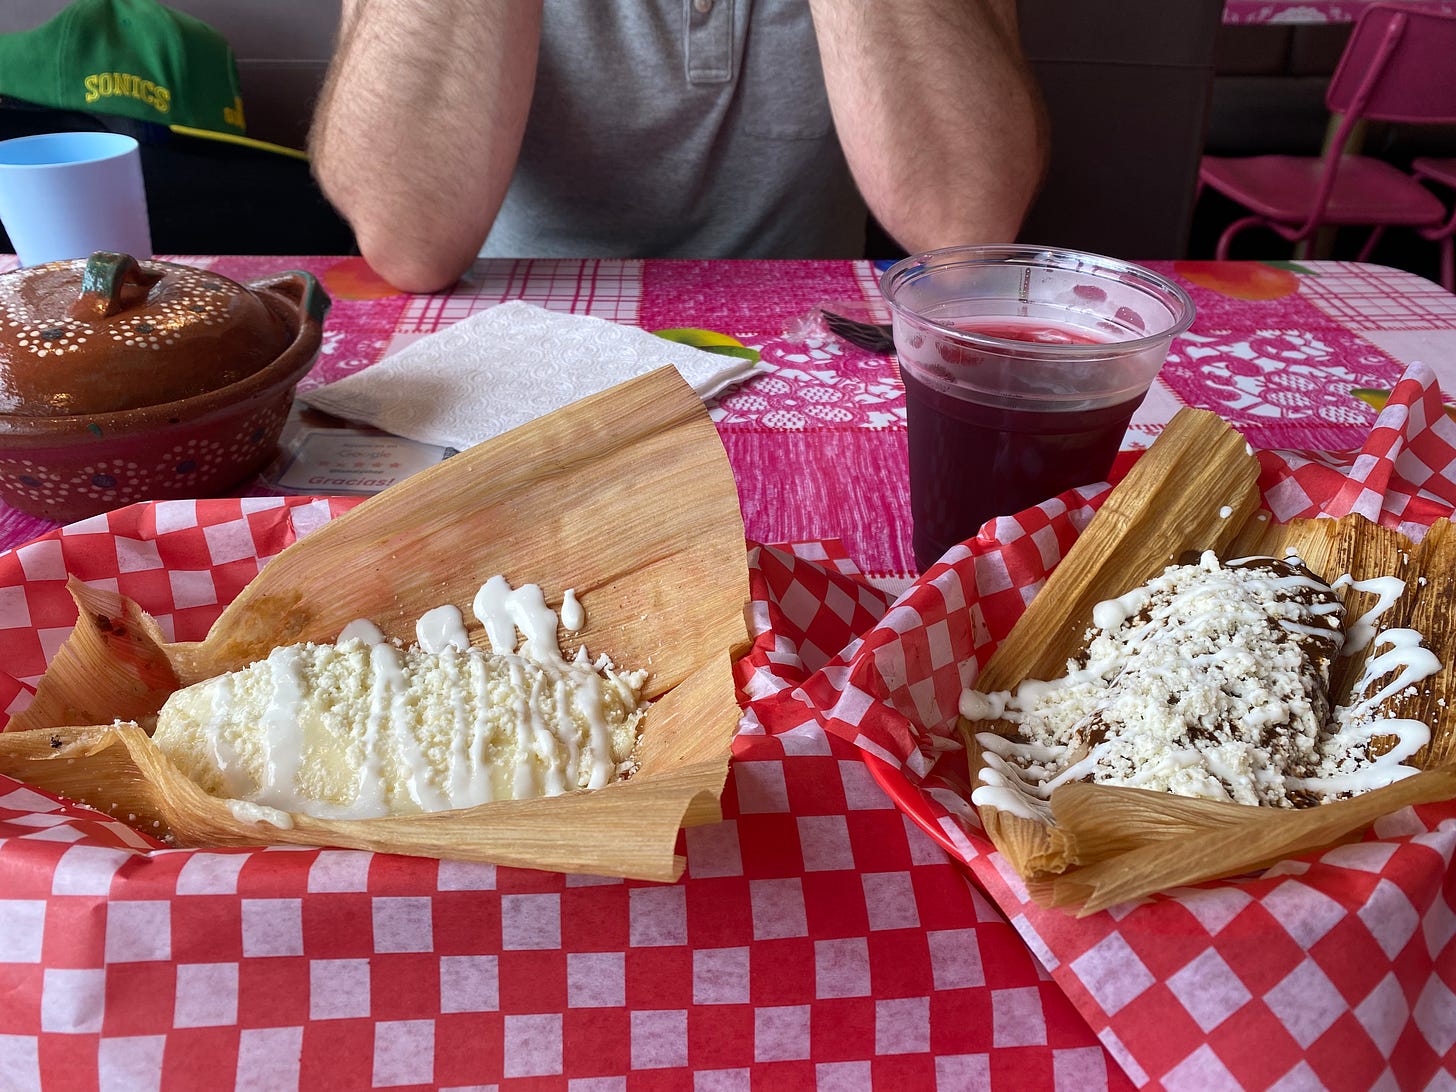 Two baskets with red and white checkered paper, each with a different tamale inside, the corn husks open and the tamales covered with crumbles of queso and drizzles of crema. Behind them is a painted stoneware pot with a lid, a clear cup of light purple agua de jamaica, and on the opposite side of the table, Iain, wearing a grey shirt, rests his elbows on the table.